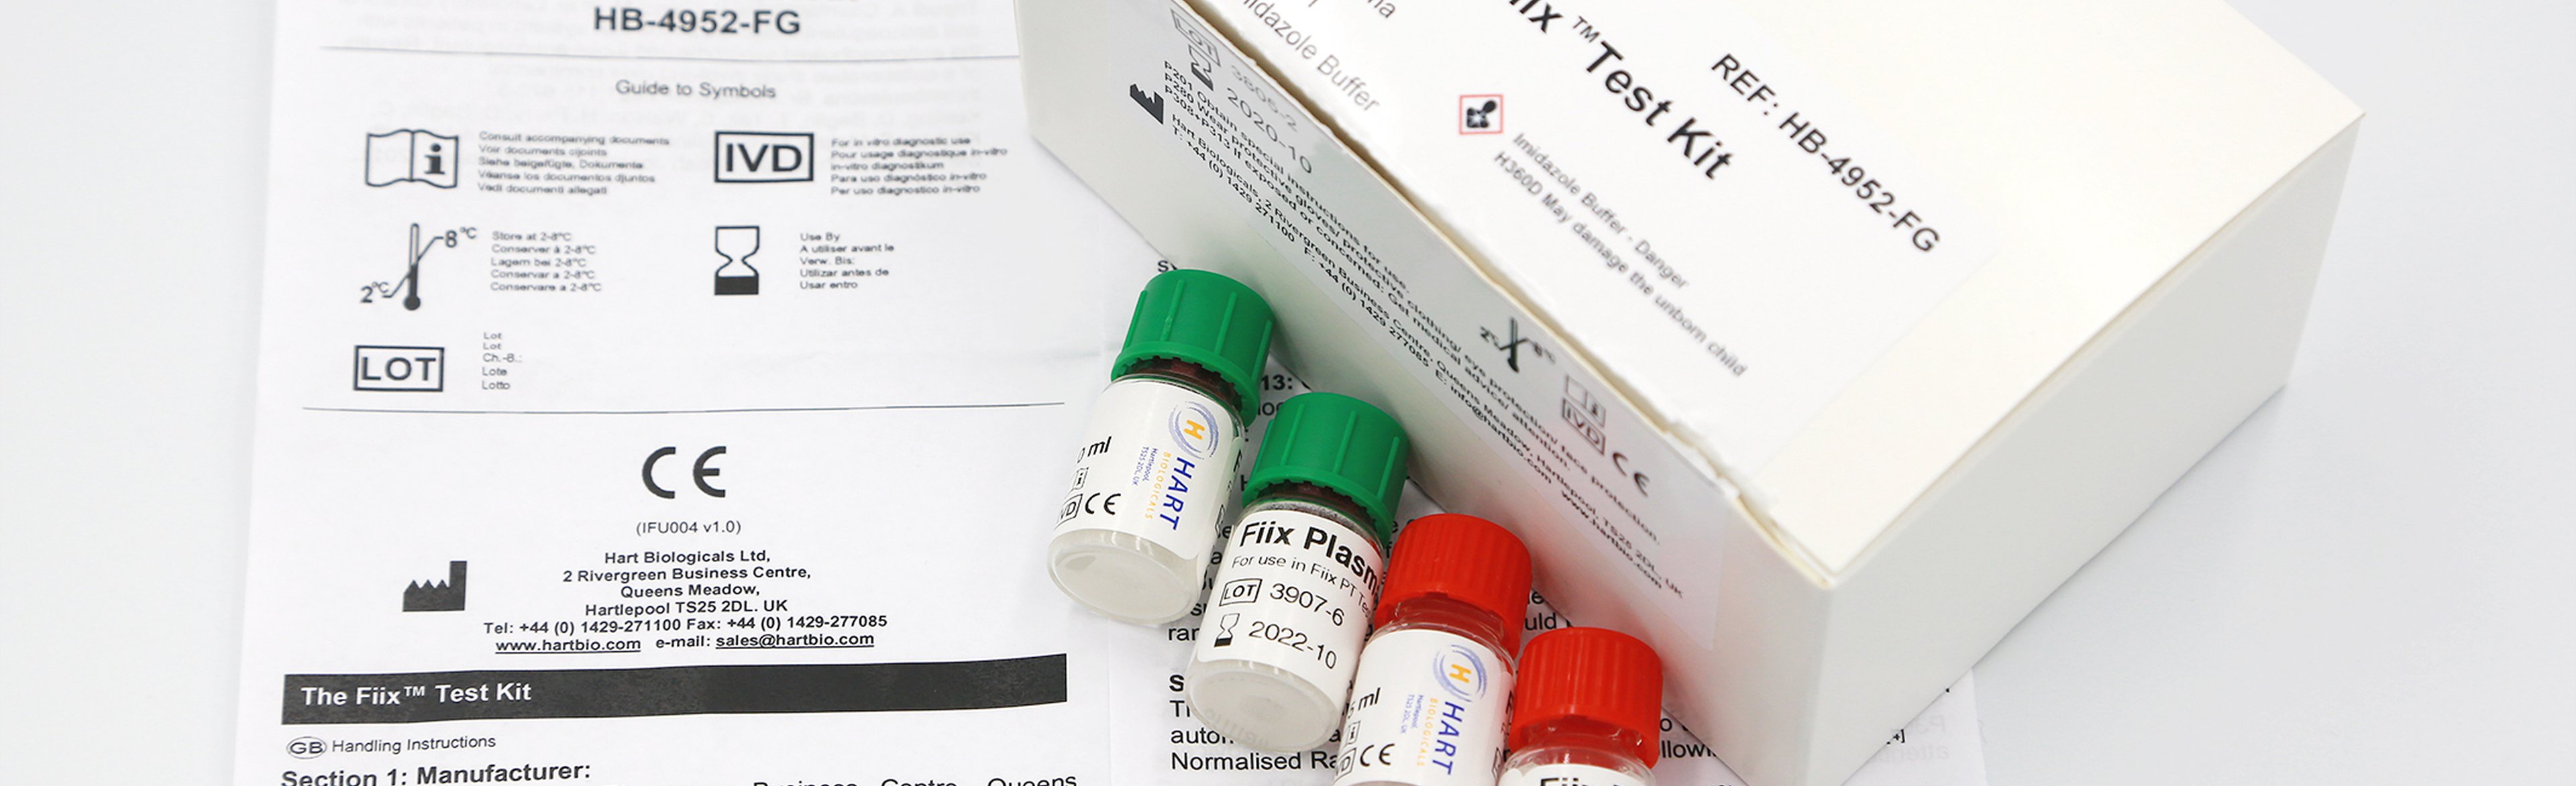 The Fiix™ Test now available as a fully compliant IVD Image